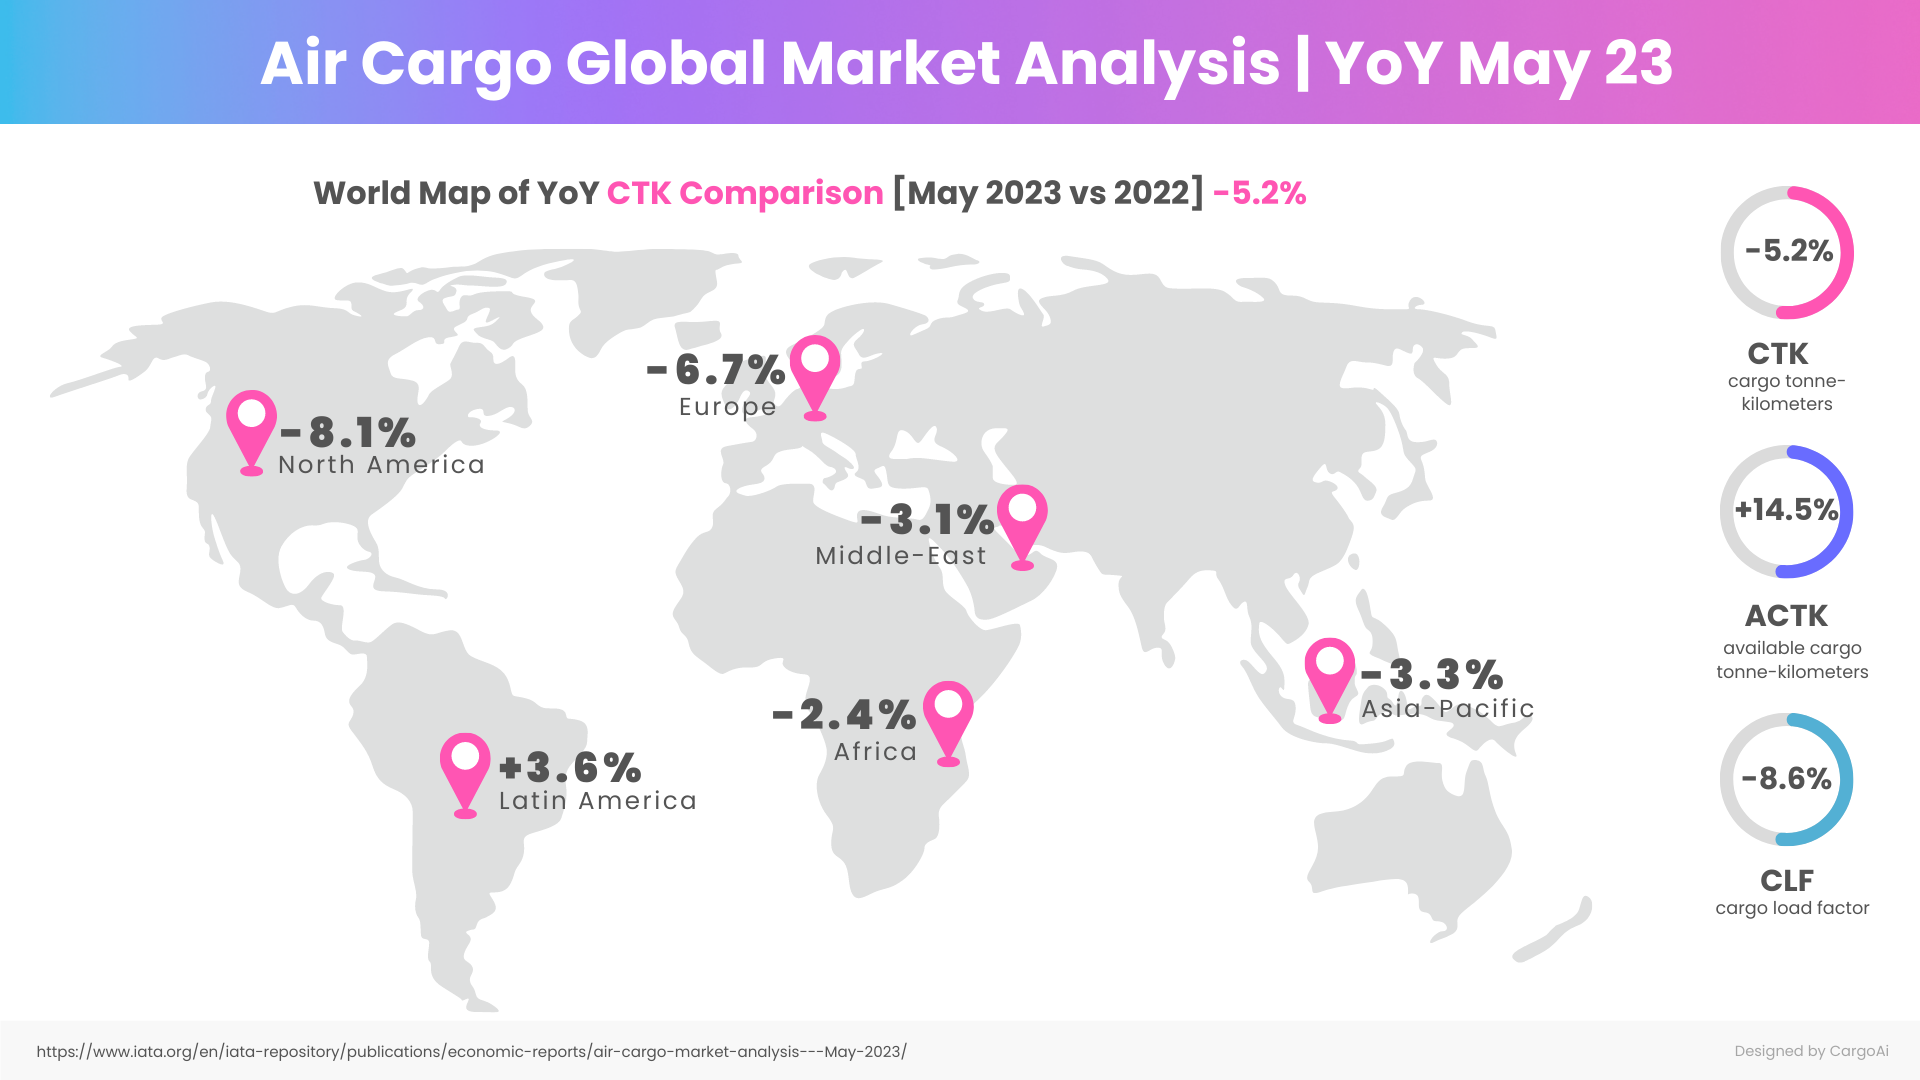 Air Cargo Global chargeable weight analysis of Jun 2023